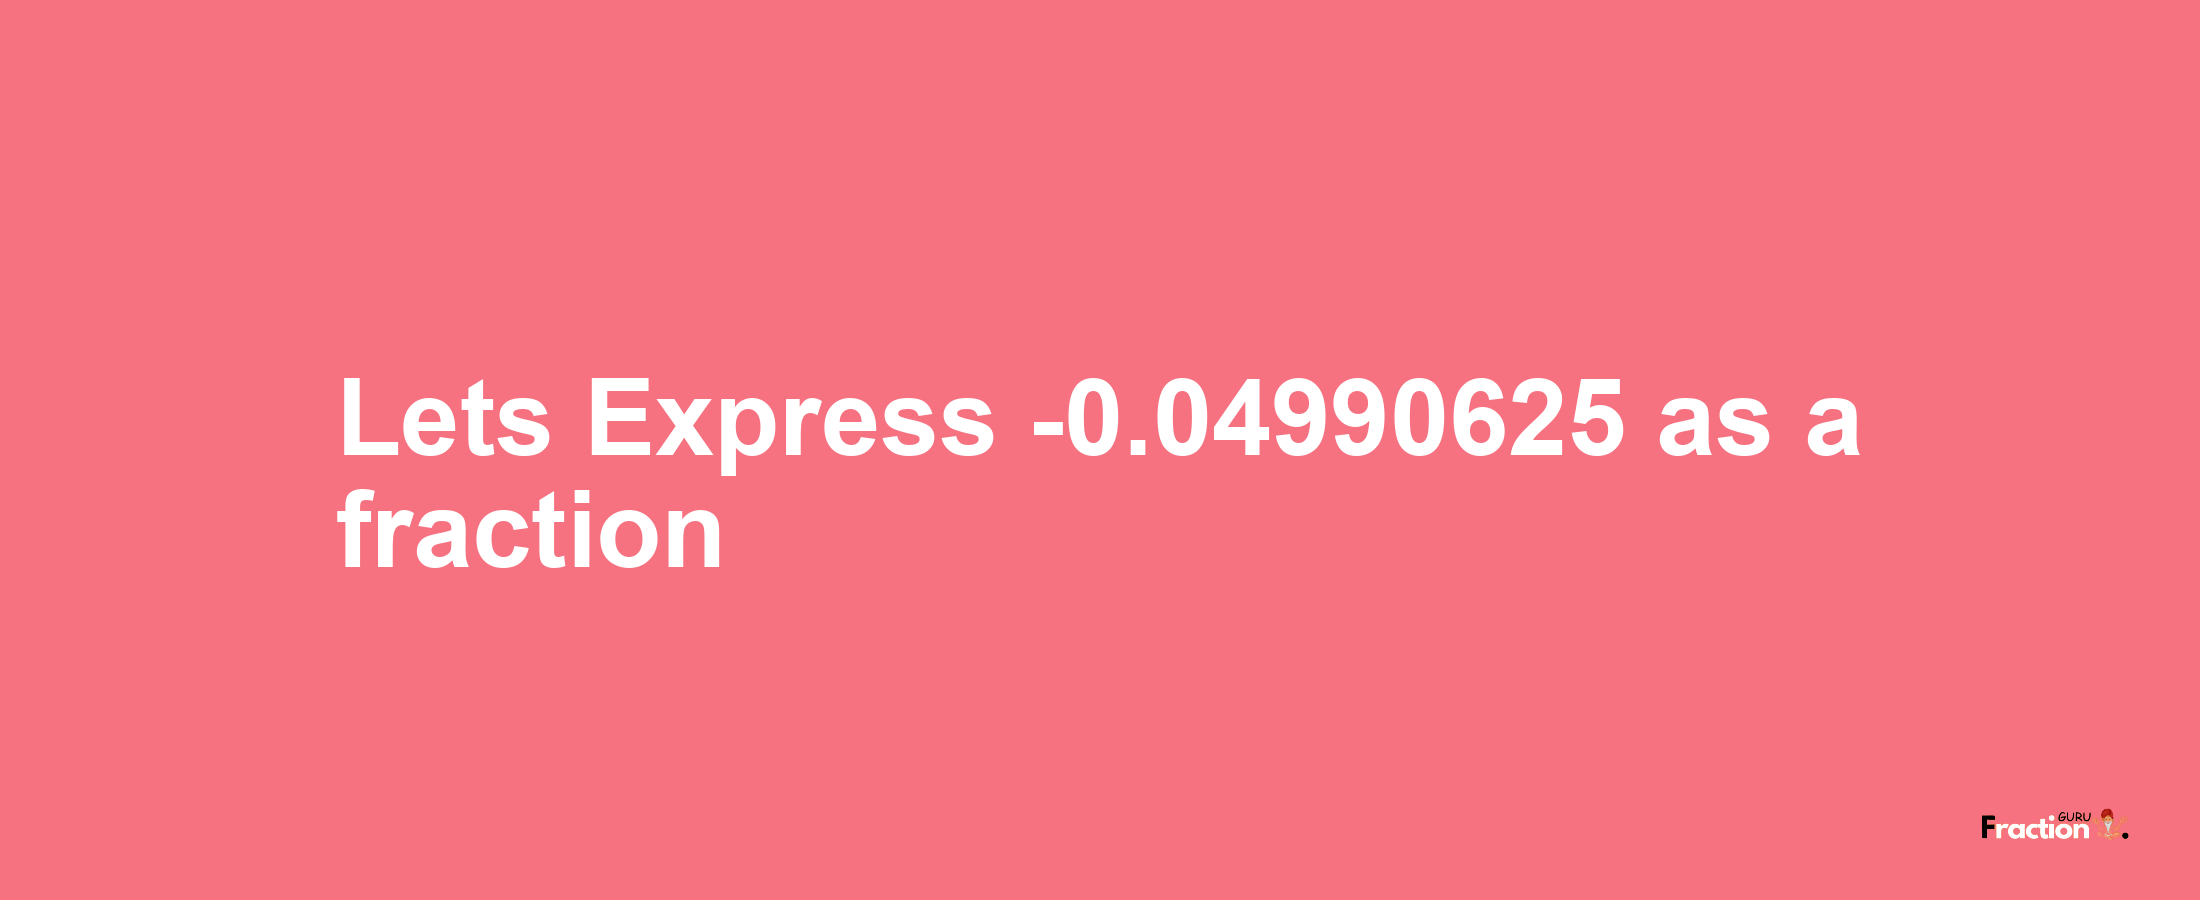 Lets Express -0.04990625 as afraction